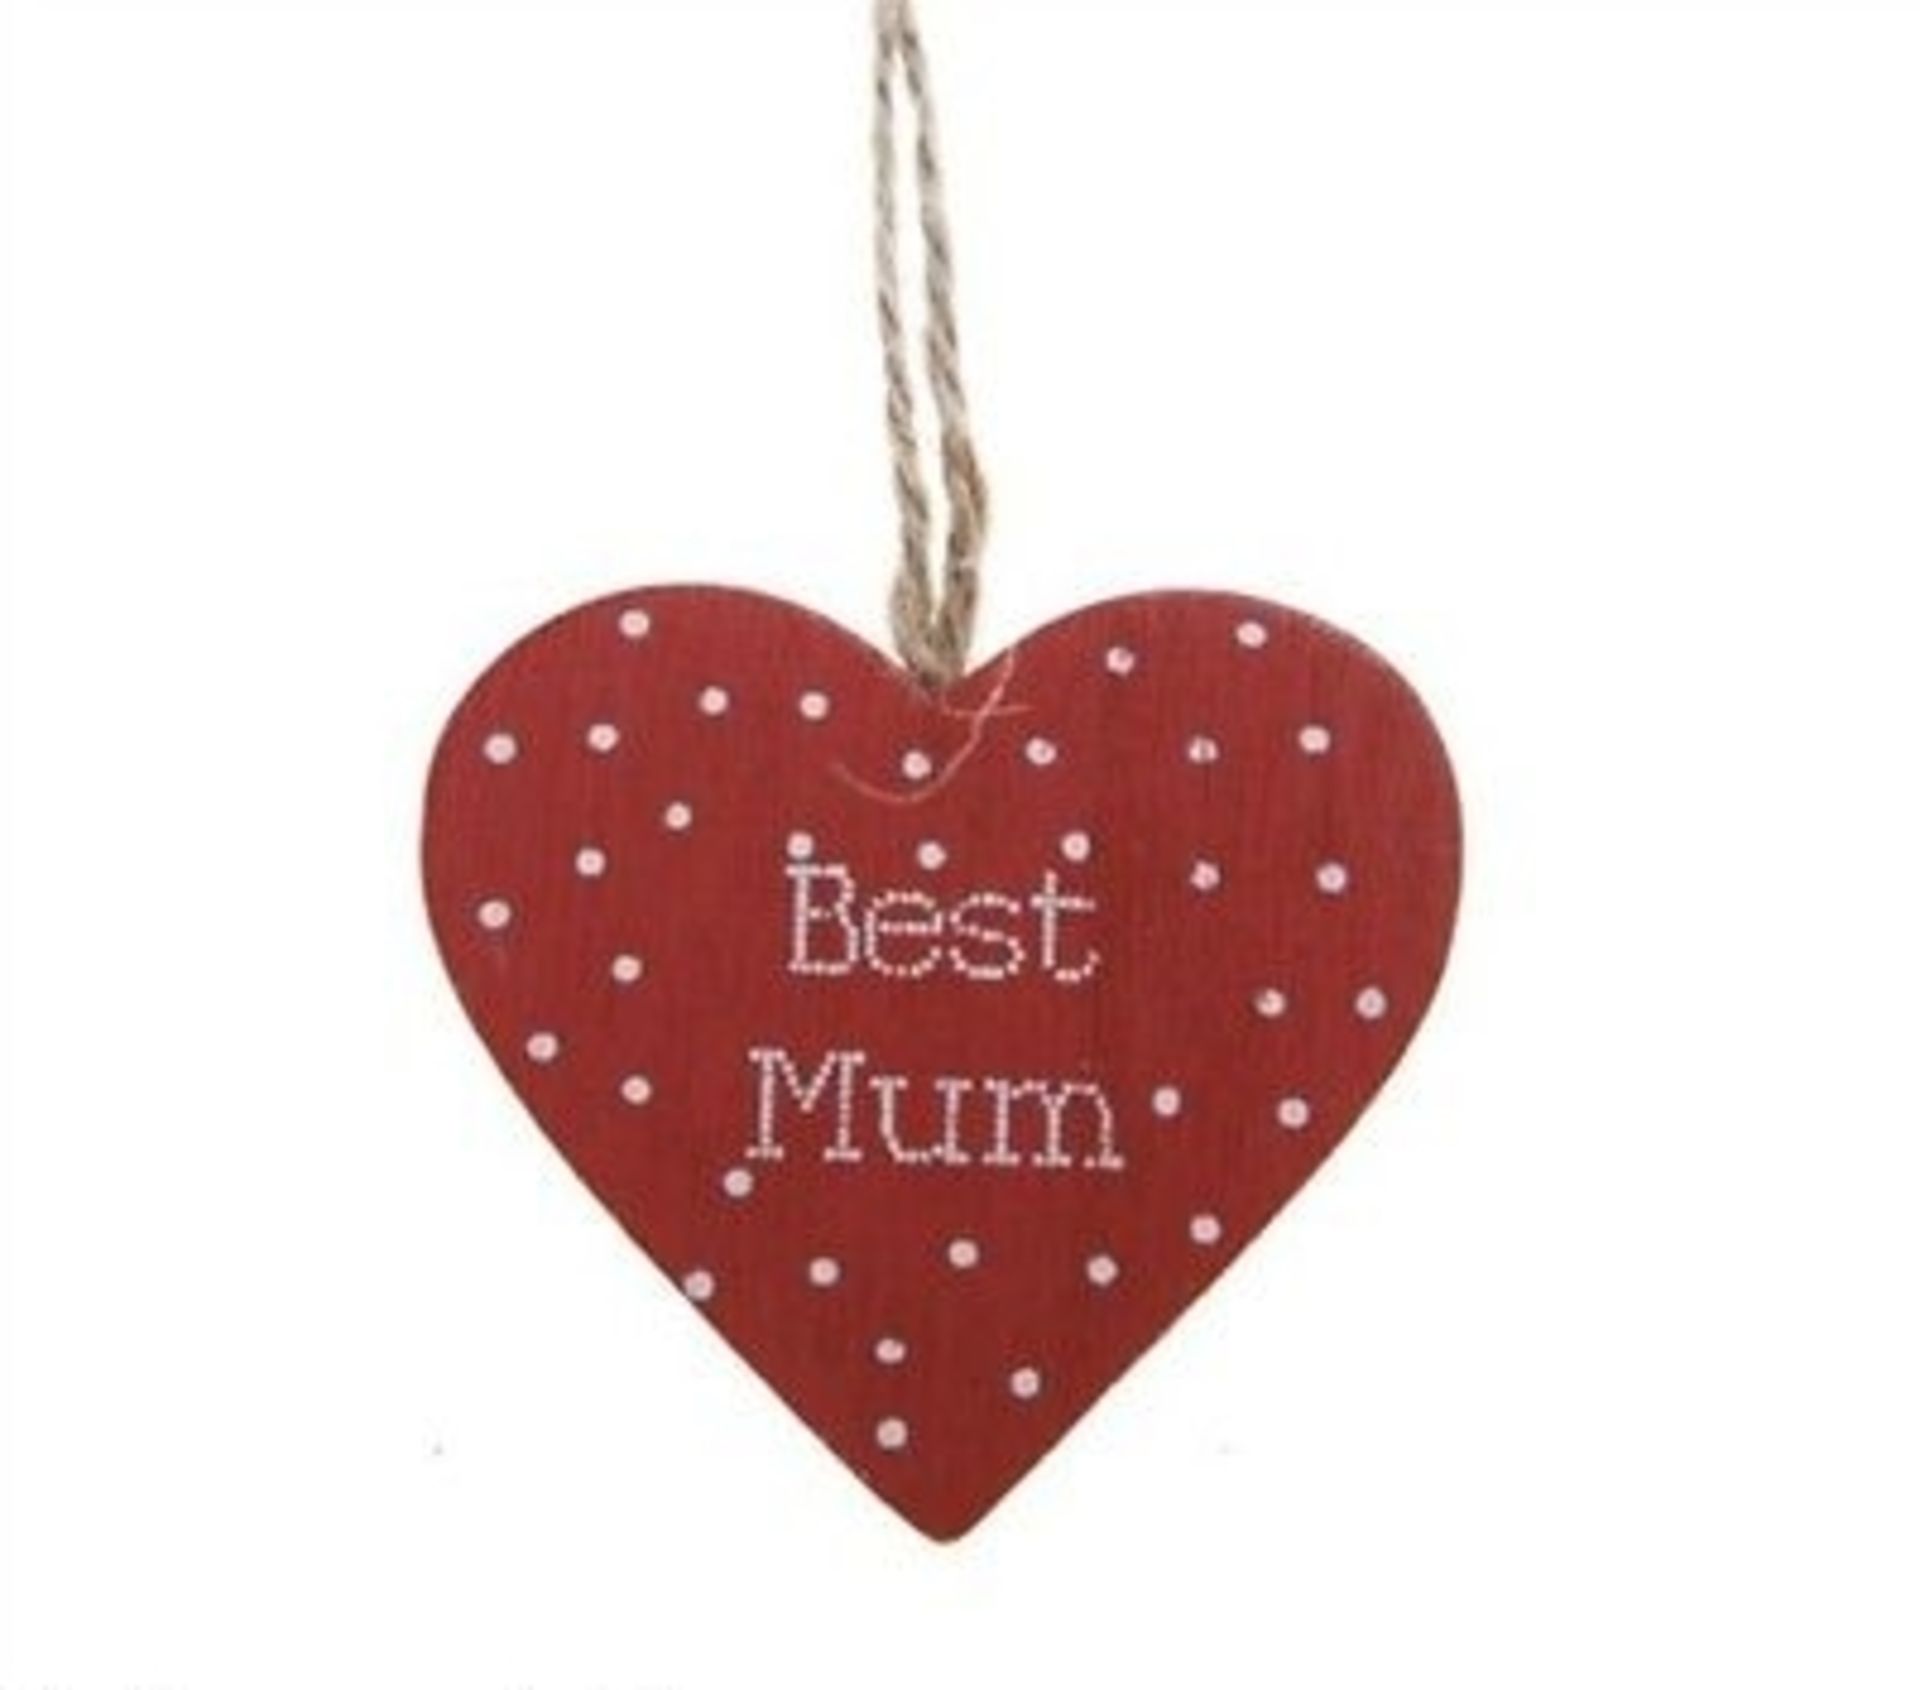 638 X HANGING HEARTS, PLAQUES, SIGNS, BIRDHOUSES, PLACE NAME HOLDER STANDS RRP £ 2,113.9 - Image 2 of 6